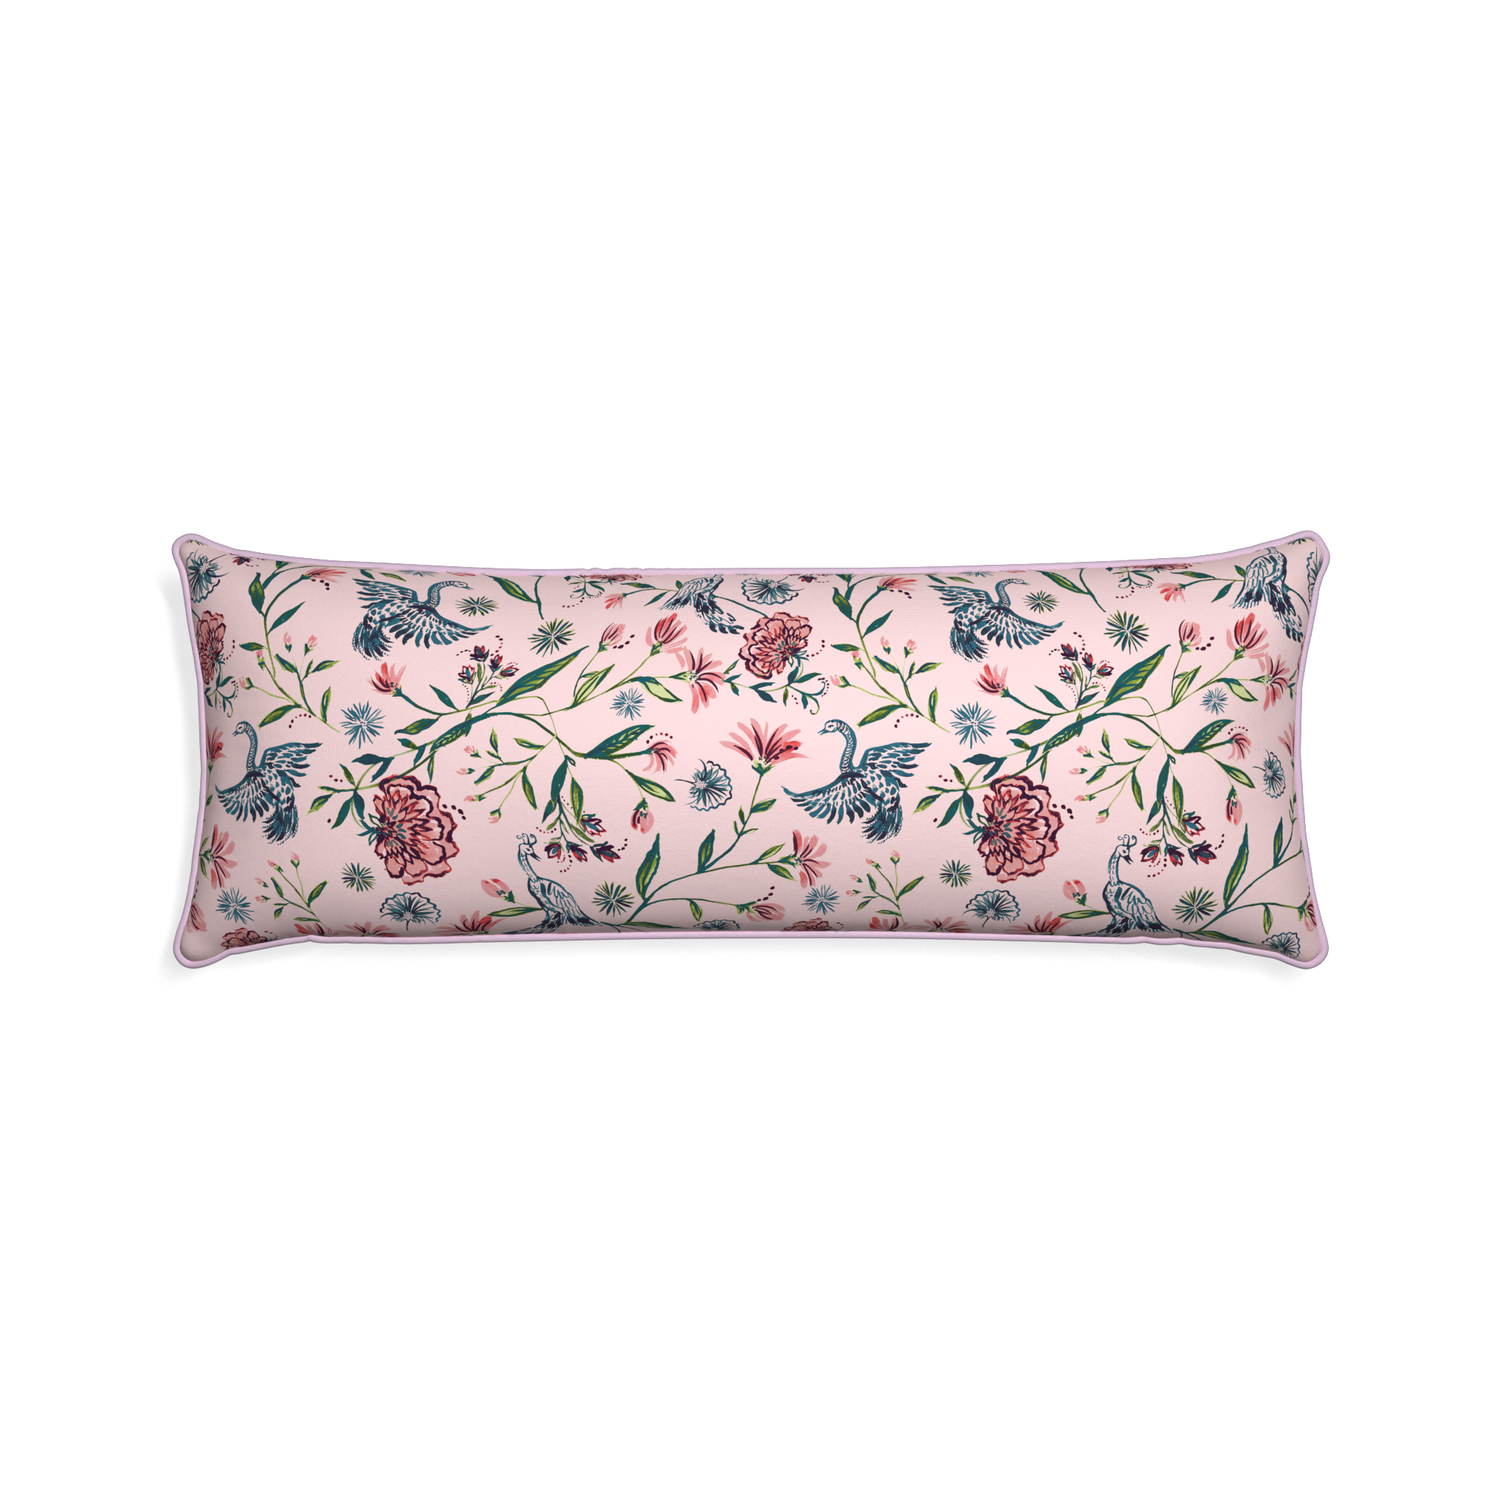 Xl-lumbar daphne rose custom pillow with l piping on white background